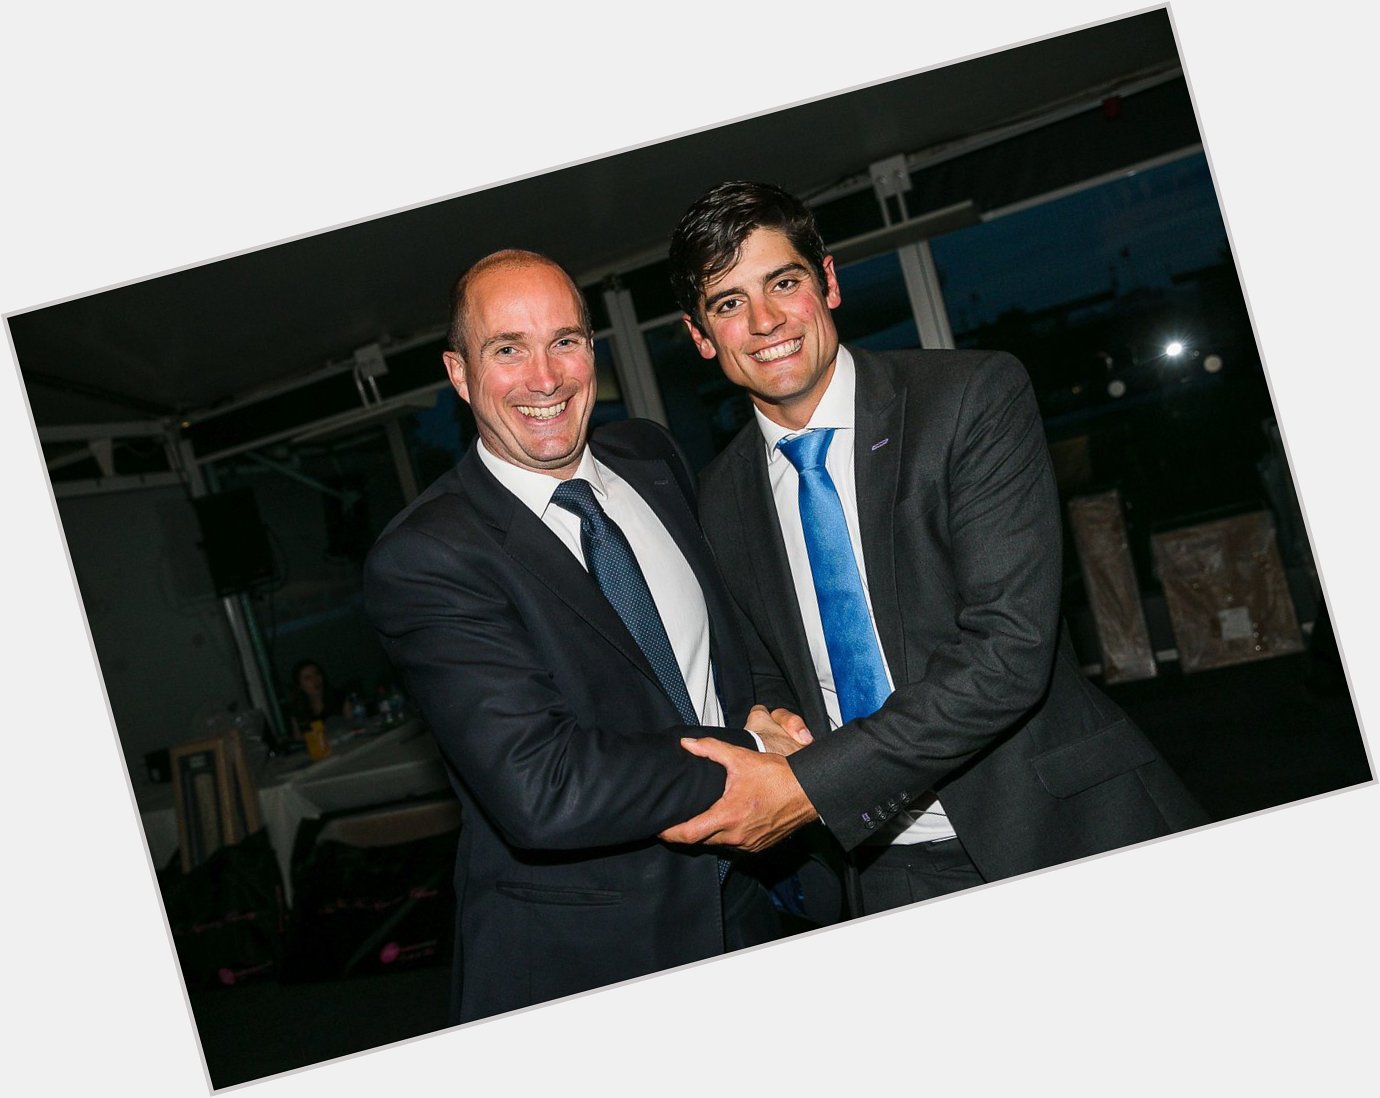 Happy Birthday to Paragon client, Alastair Cook! 